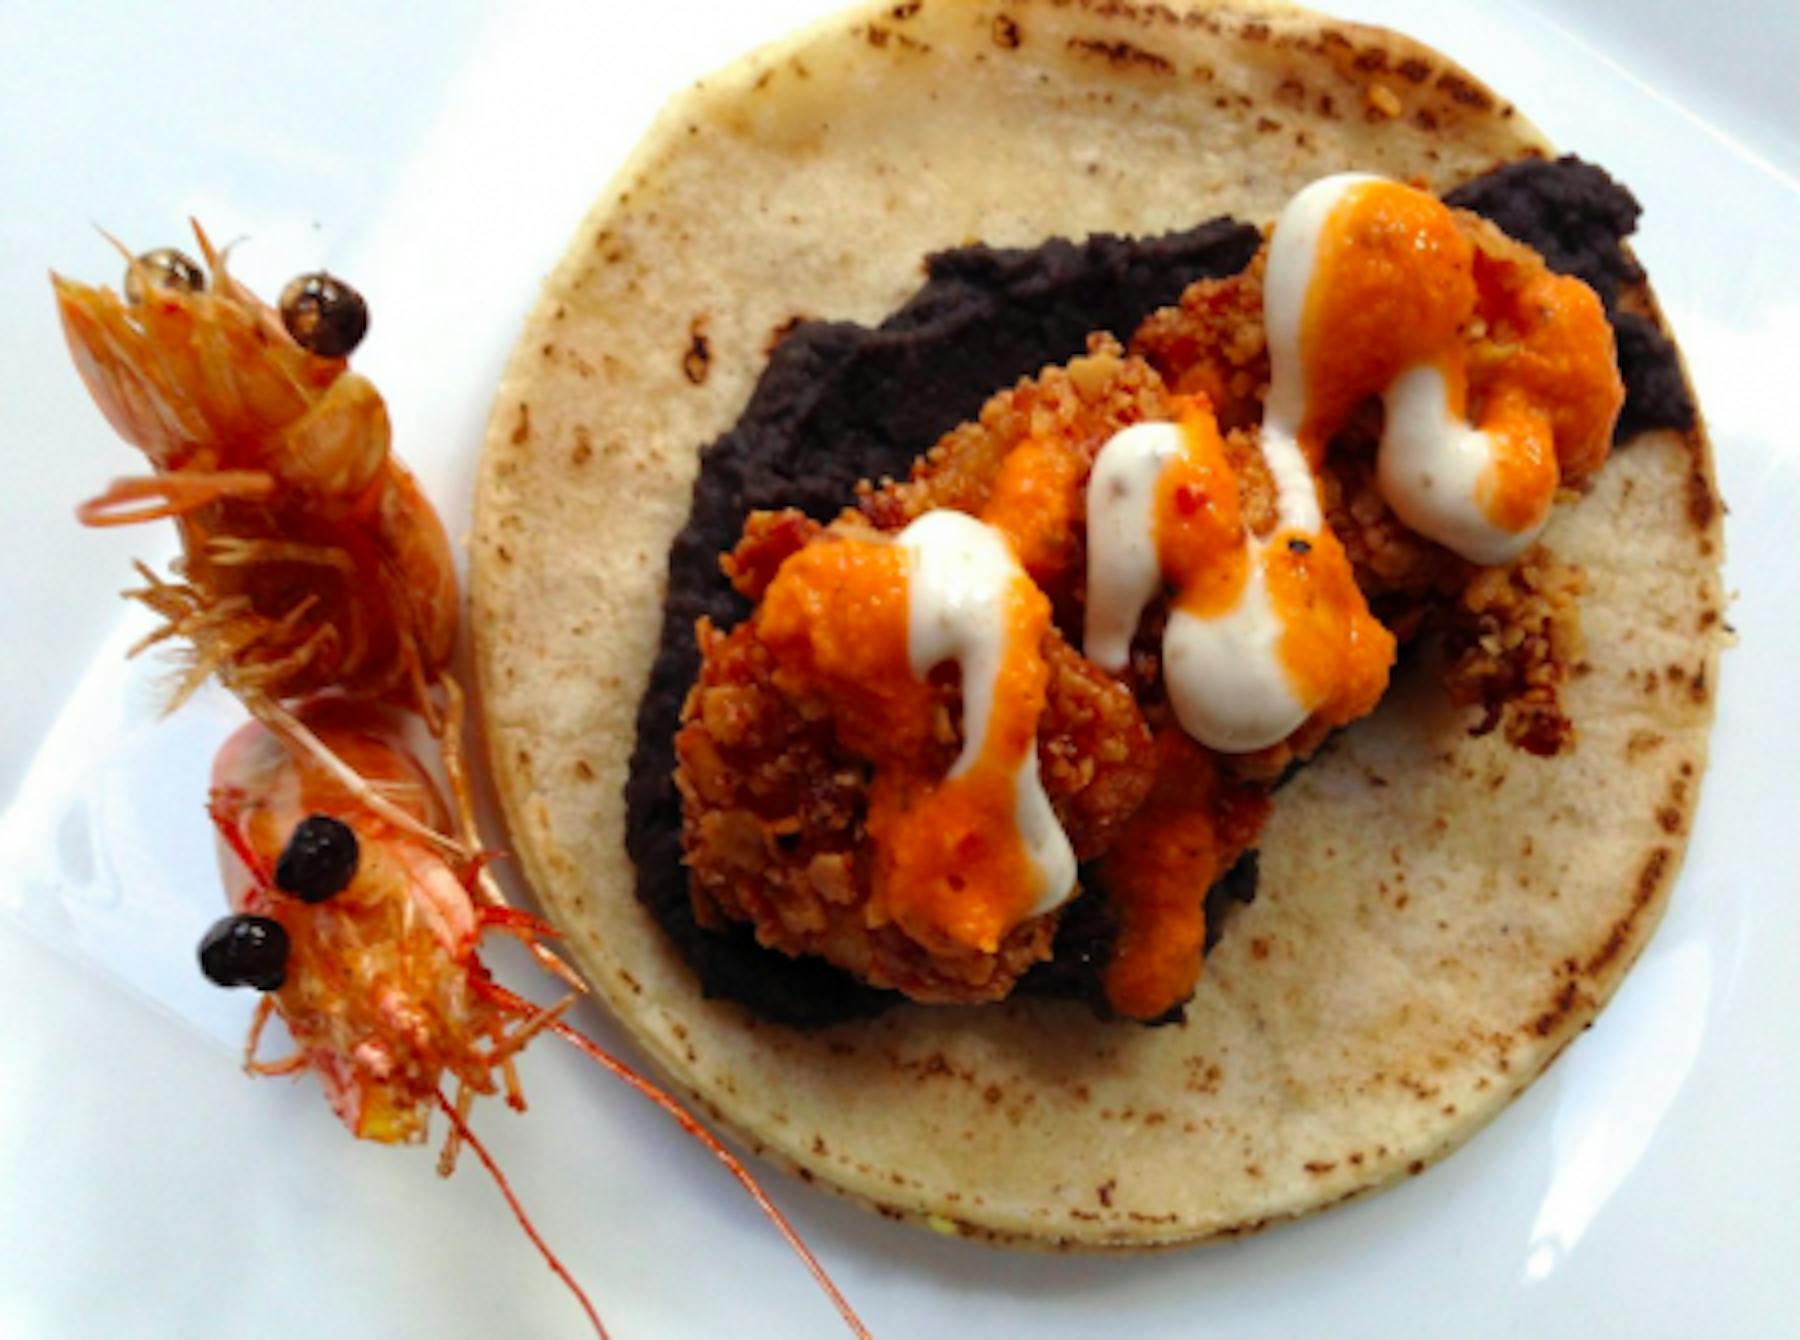 Boo! Refried black beans, tortilla-crusted shrimp, orange sauce, and beady eyes.